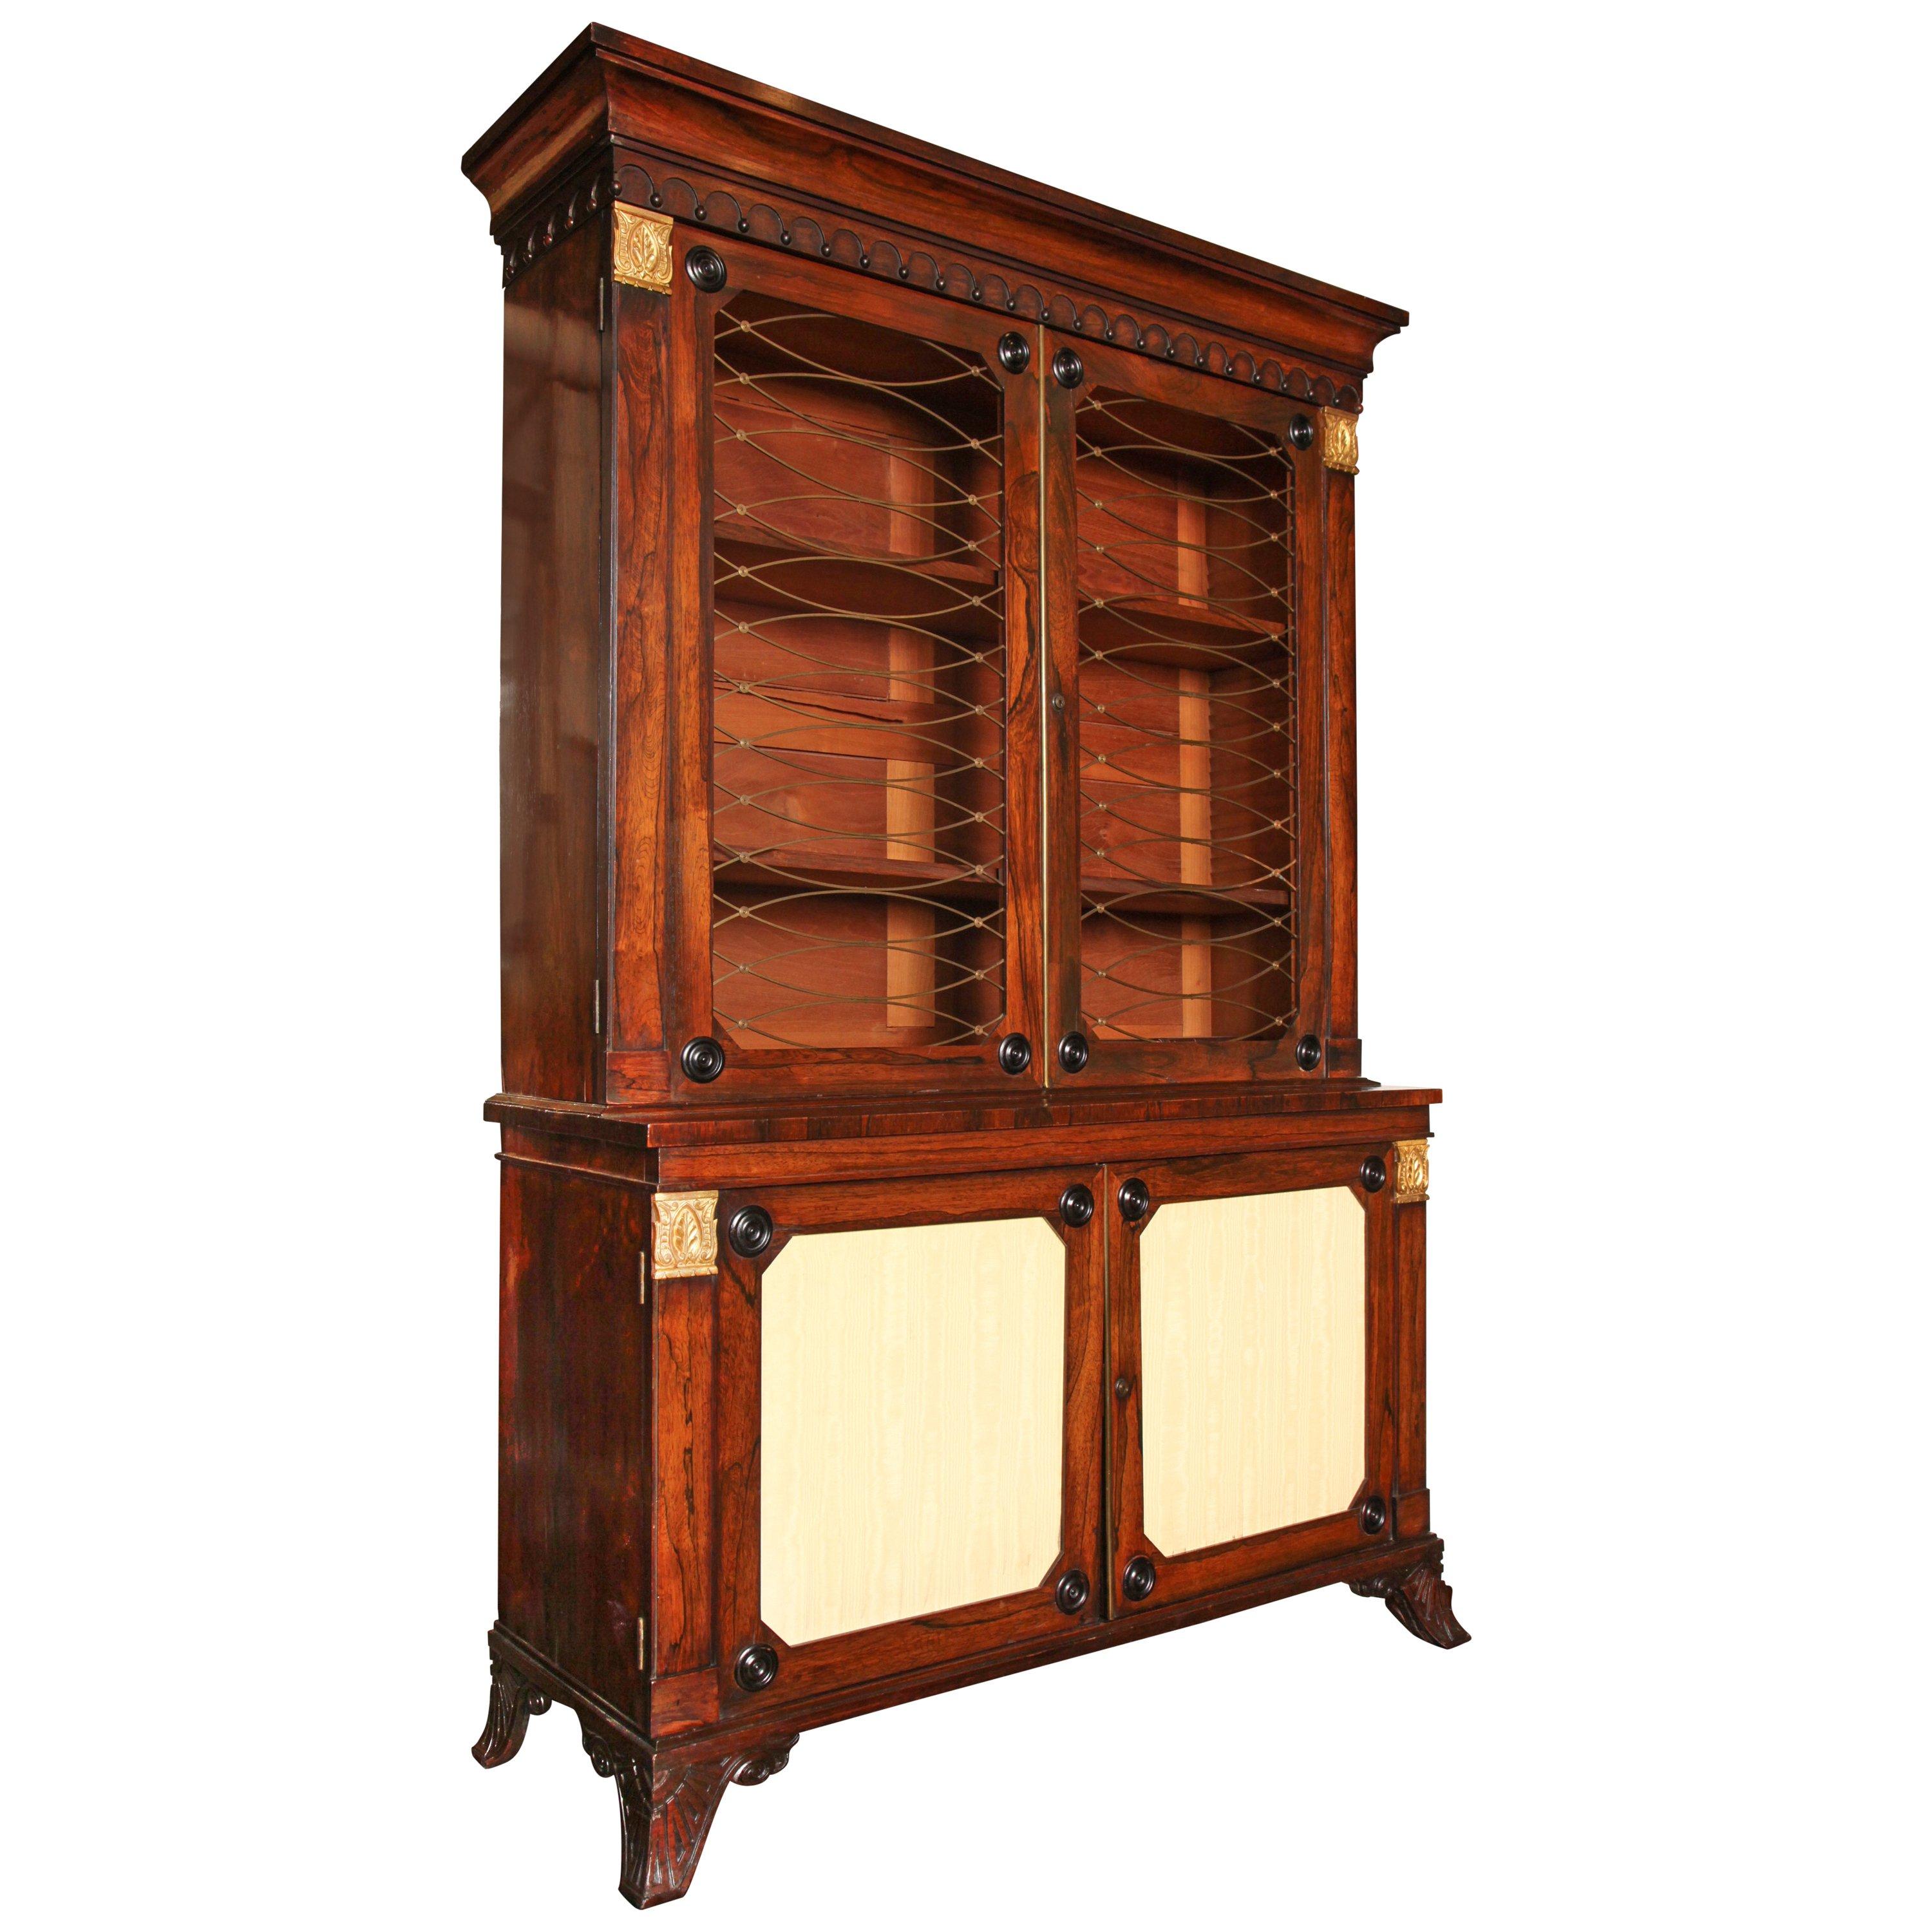 Early 19th Century English Regency Two-Door Bookcase with Storage Underneath